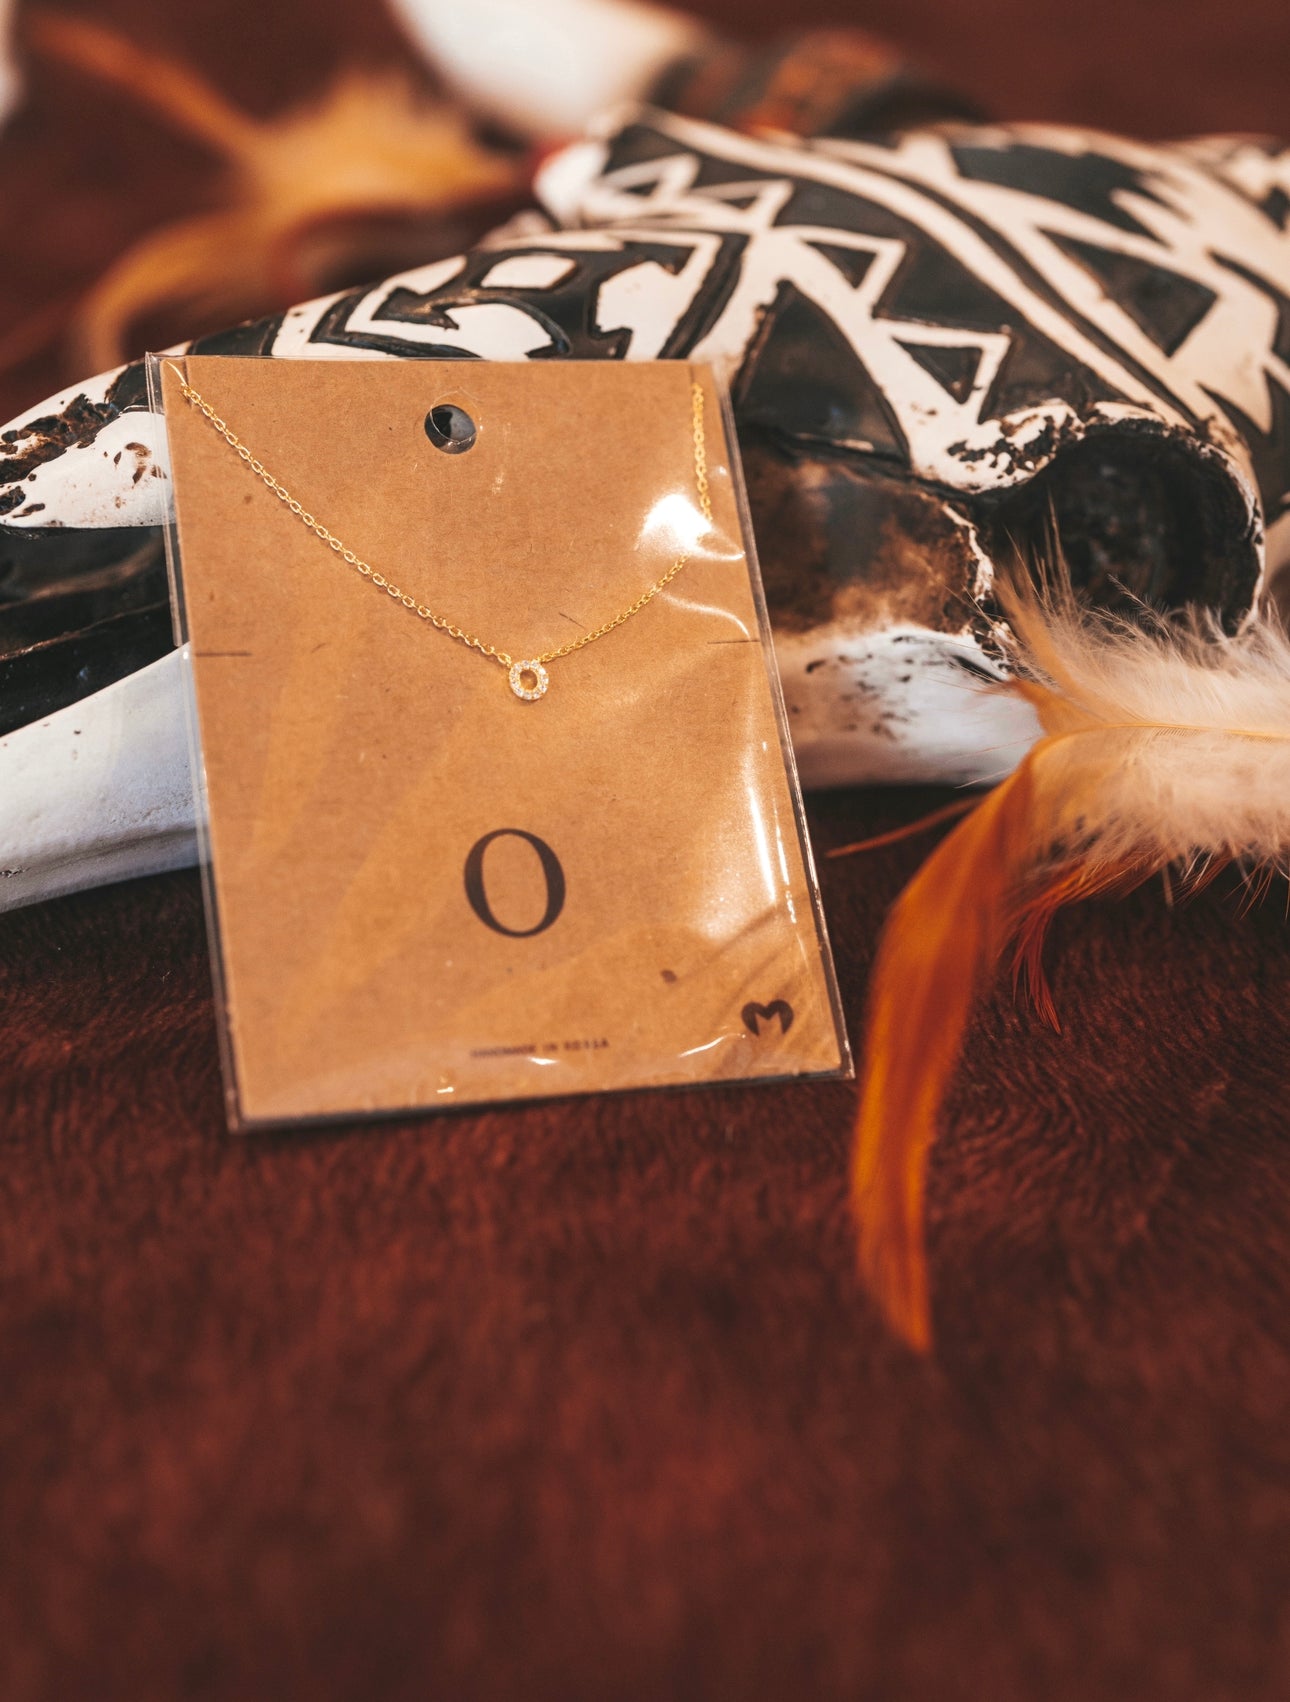 O Letter Necklace